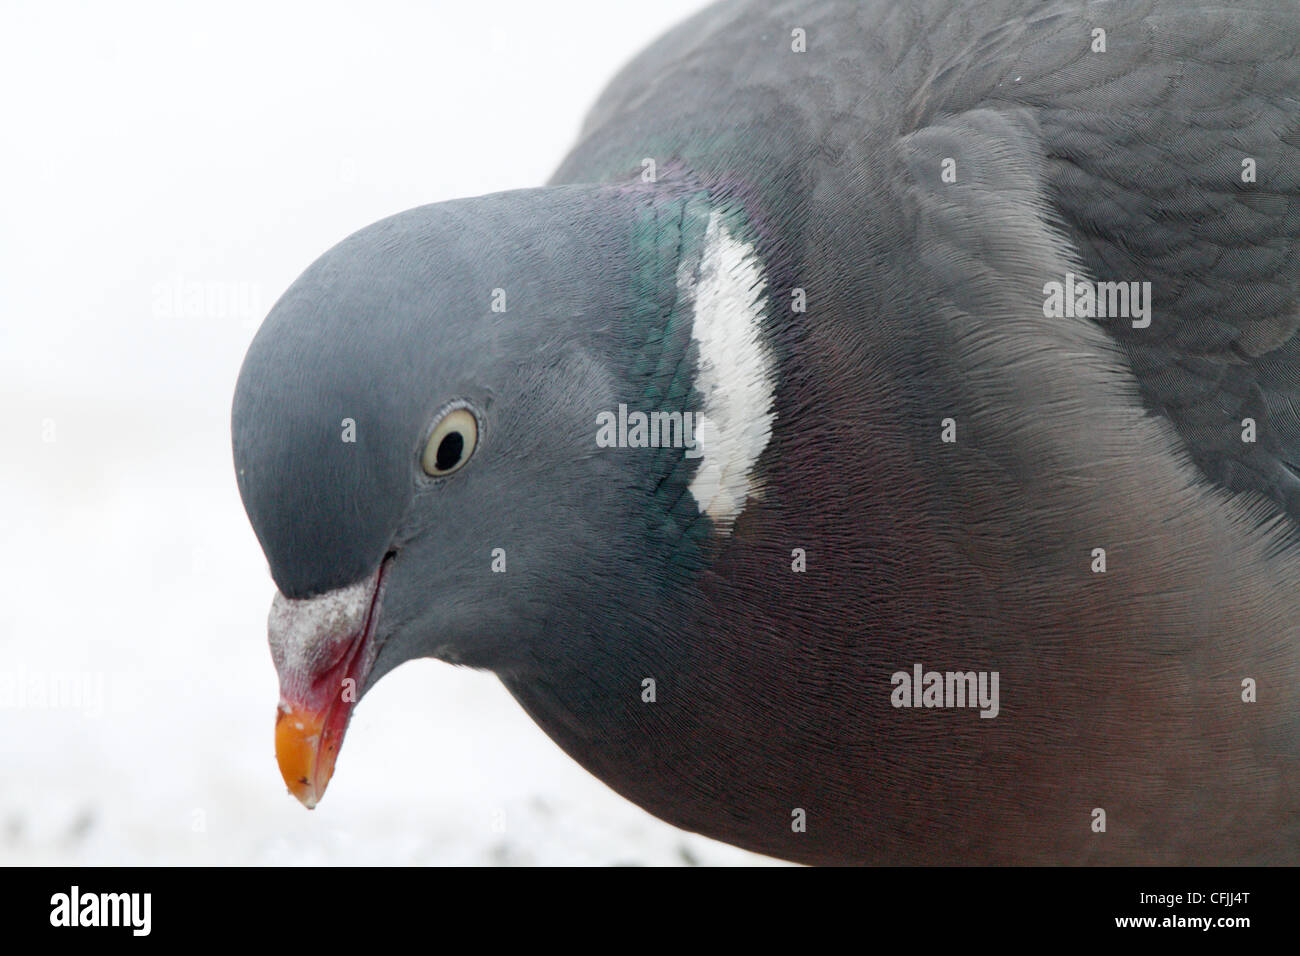 Wood pigeon, spring against snow, Sweden Stock Photo